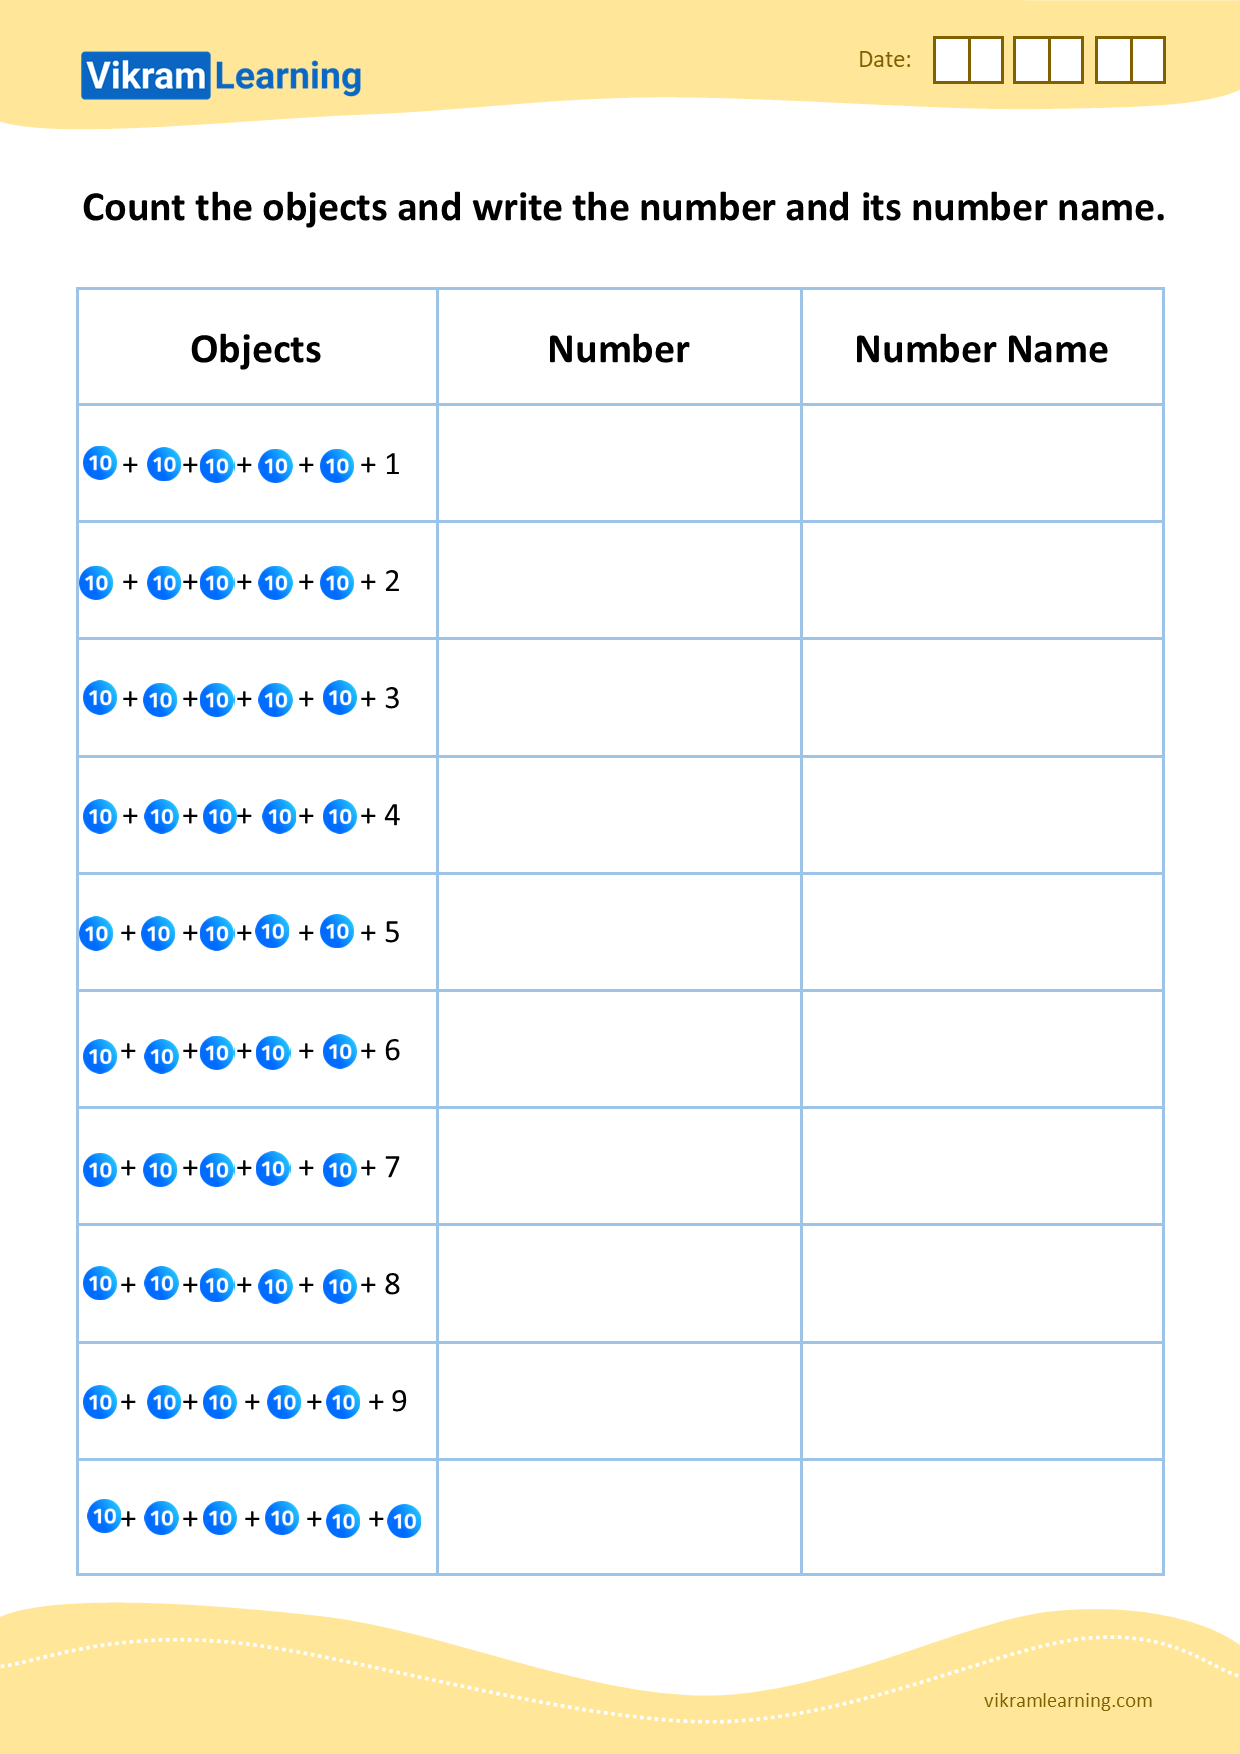 Download count the objects and write the number and its number name - 1 worksheets